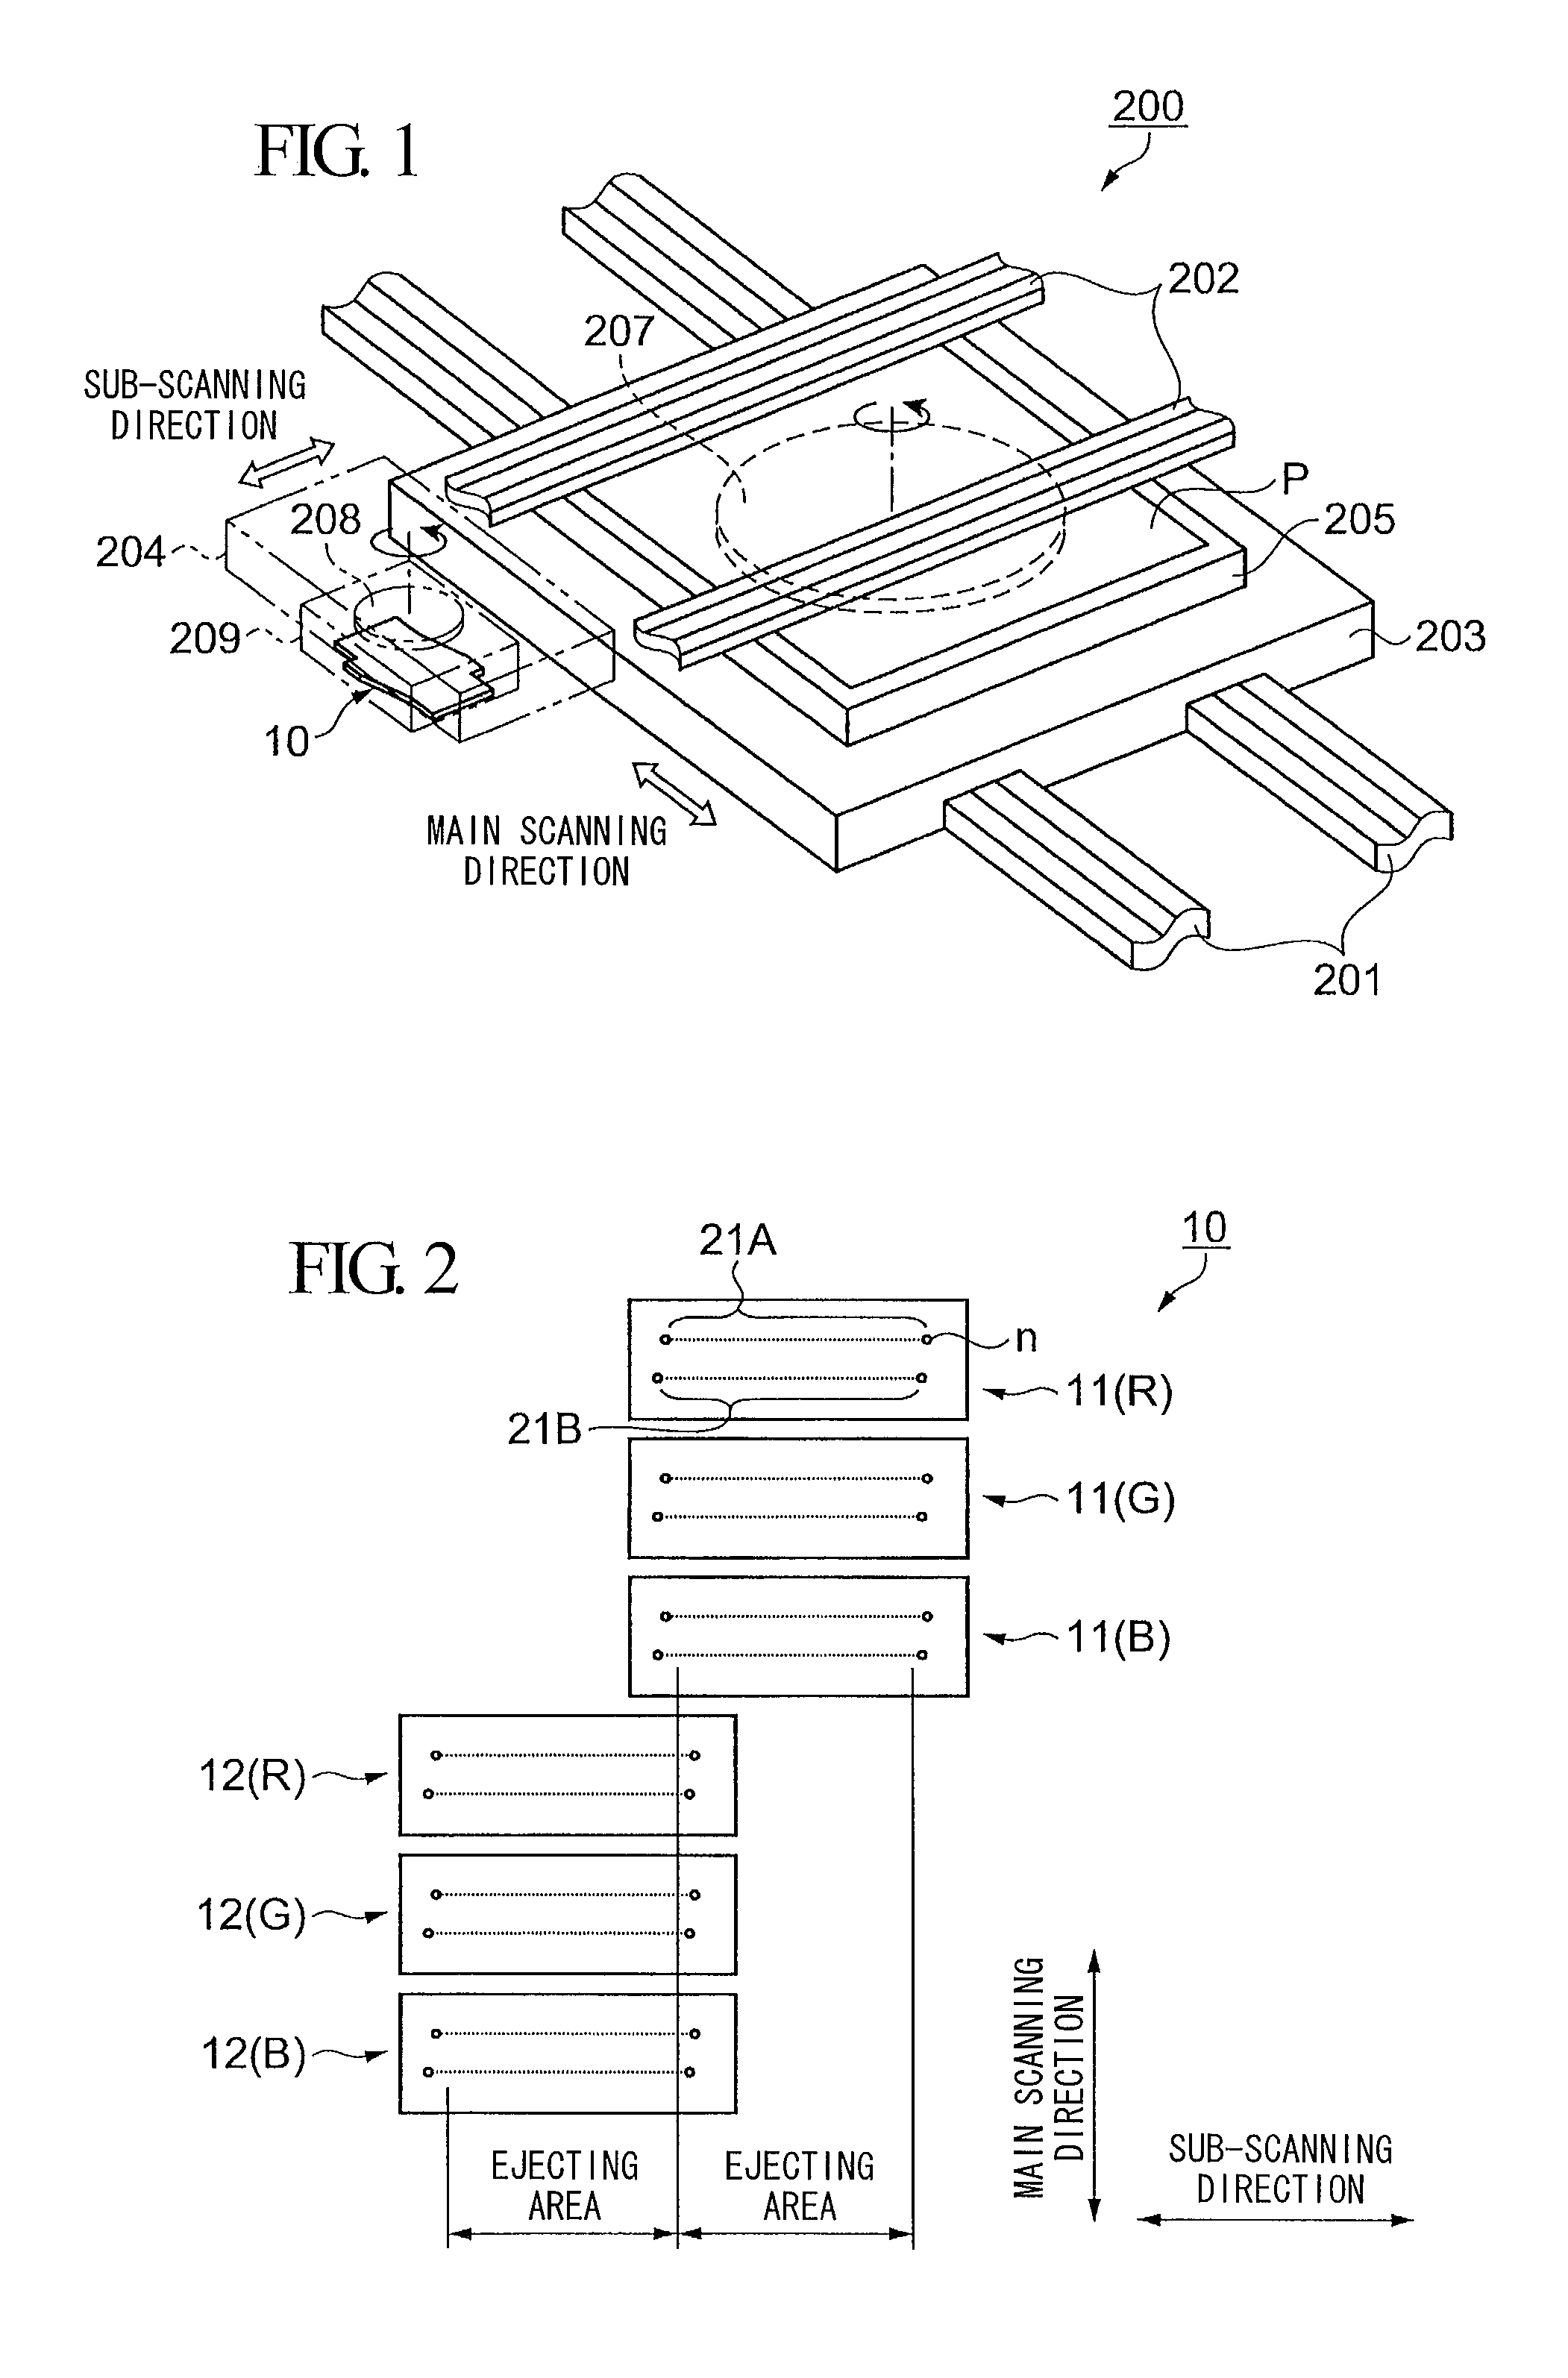 Method for setting up drive signal